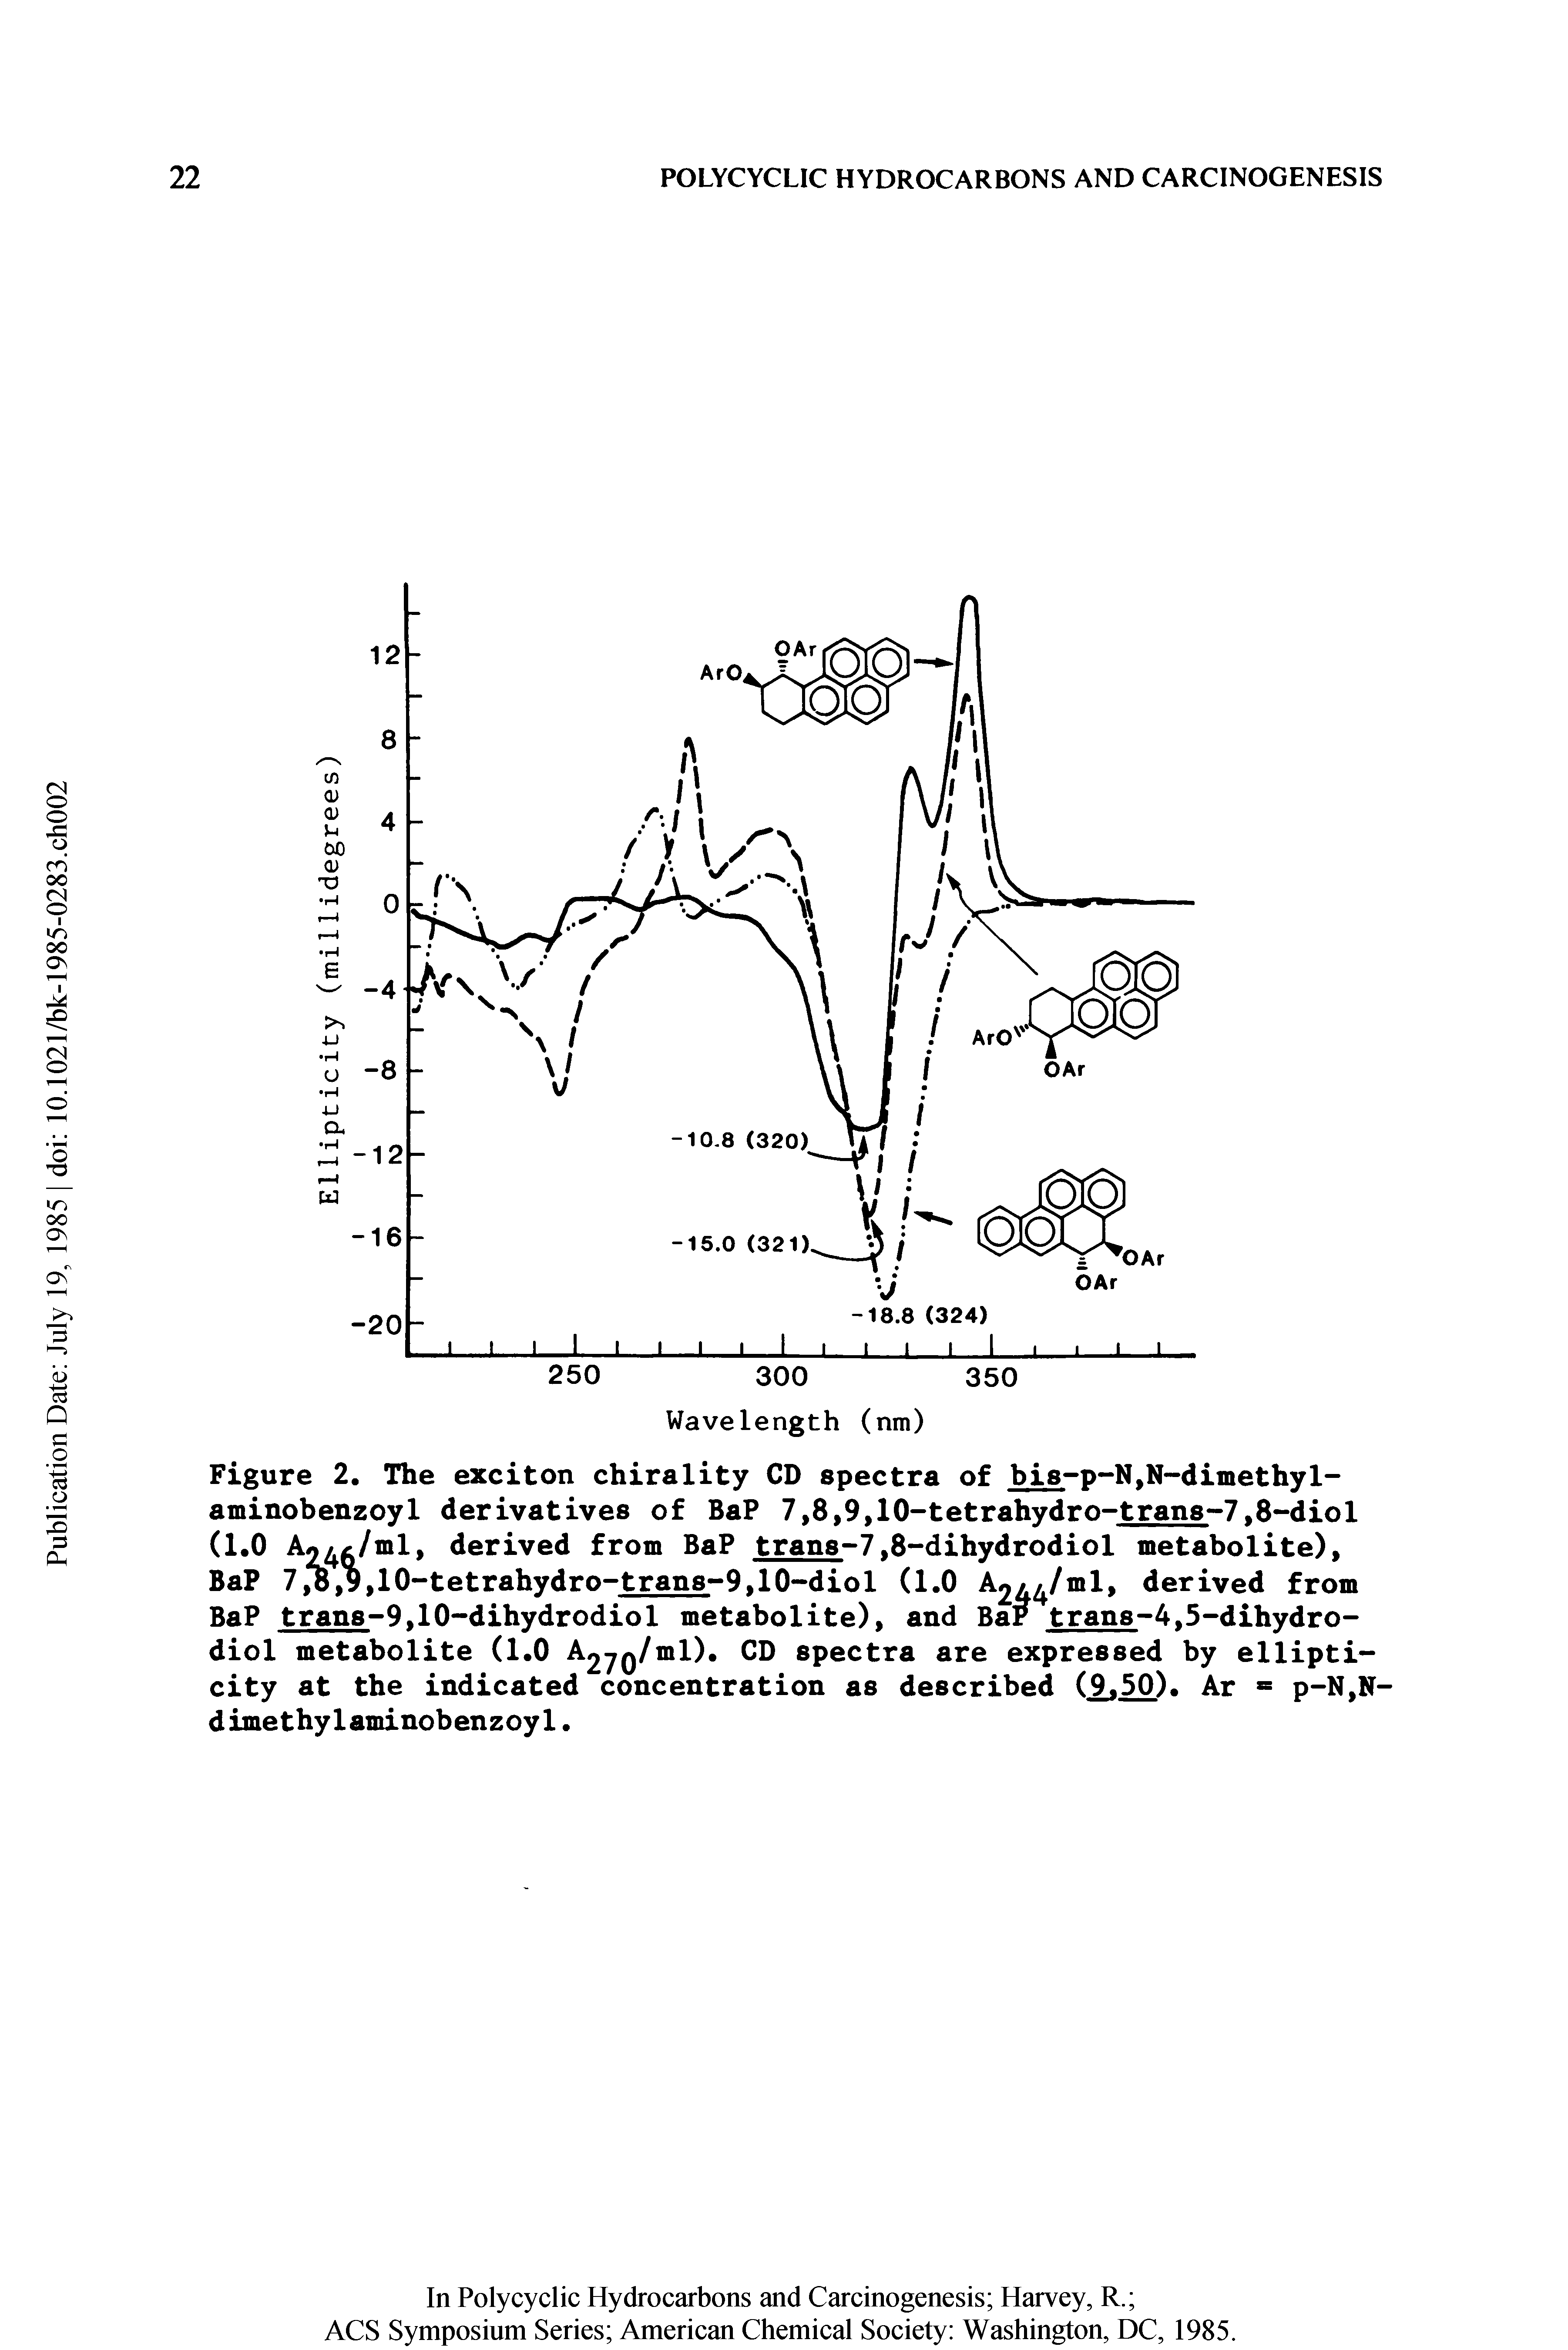 Figure 2. The exciton chirality CD spectra of bis-p-N,N-dimethyl-aminobenzoyl derivatives of BaP 7.8.9.lO-tetrahvdro-trans-7.8-diol (1.0 A fc/ml, derived from BaP trans-7.8-dihvdrodiol metabolite),...